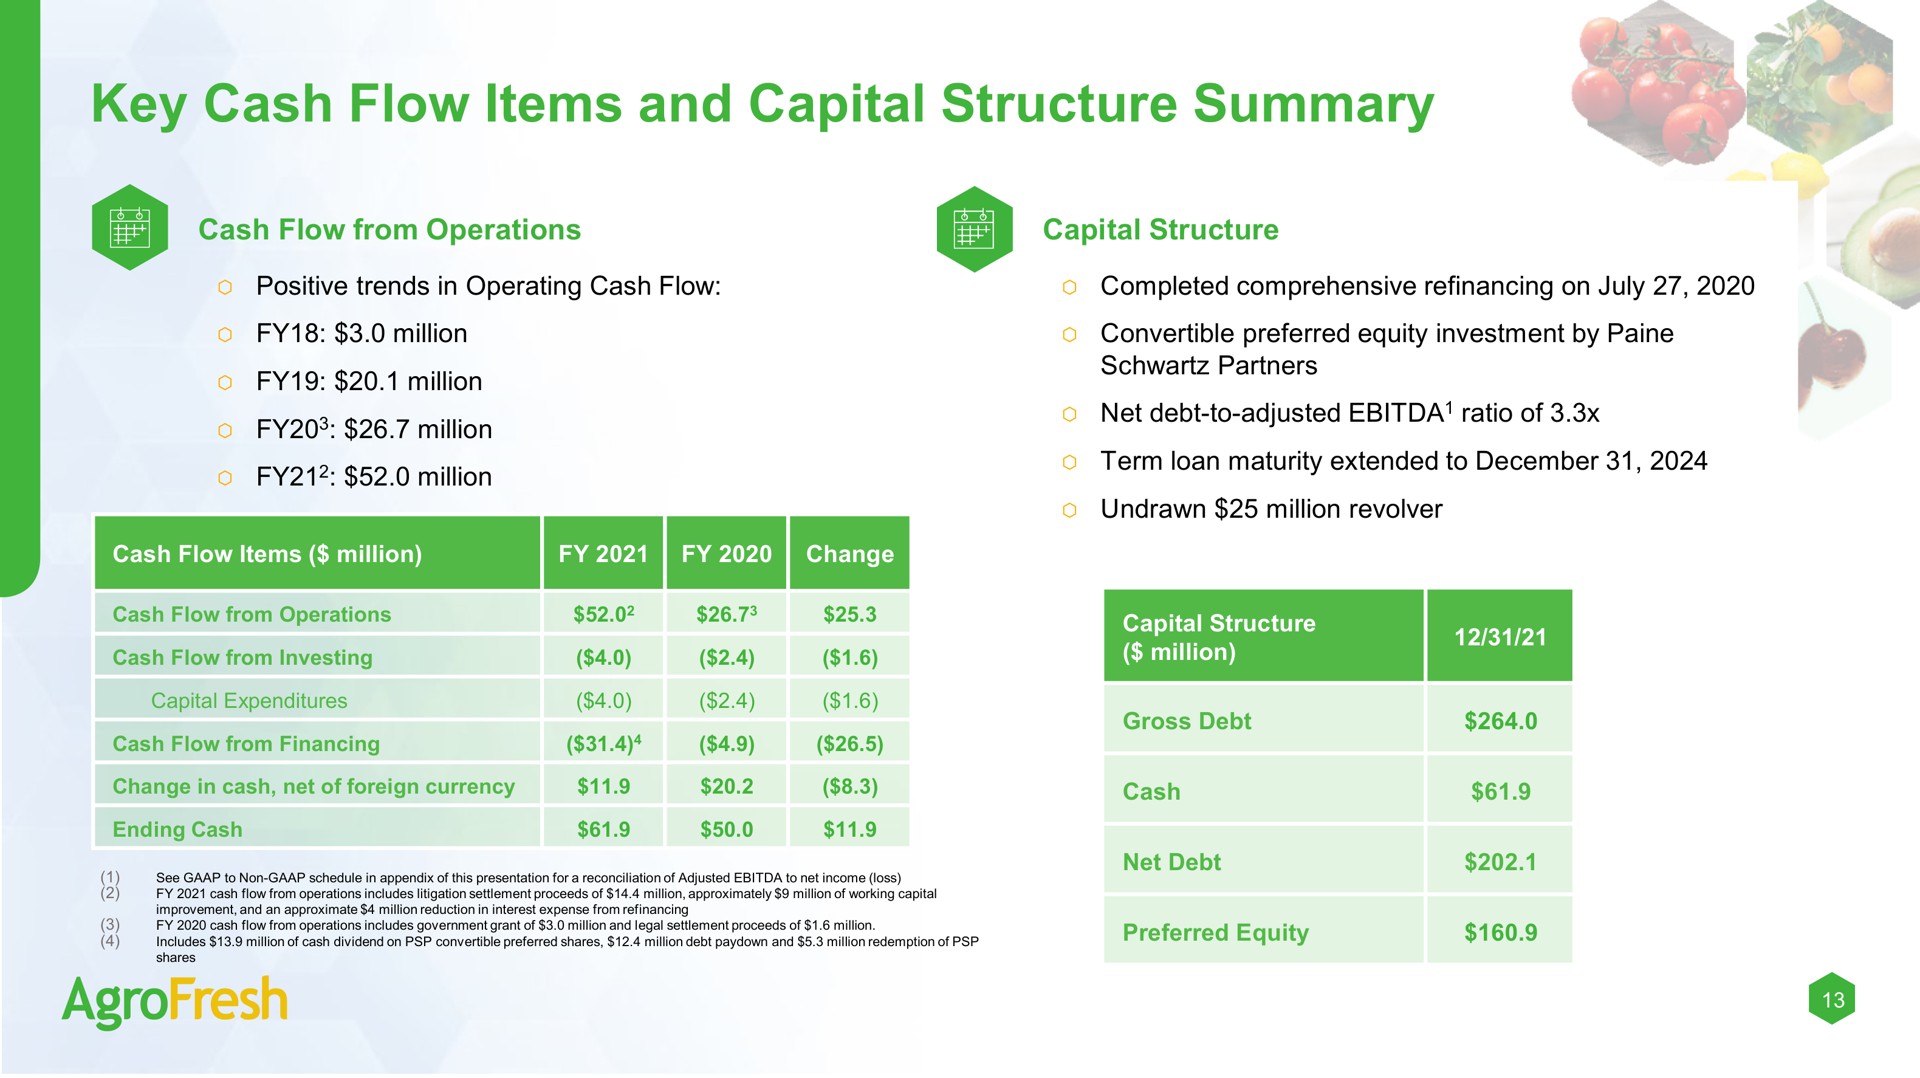 key cash flow items and capital structure summary | AgroFresh